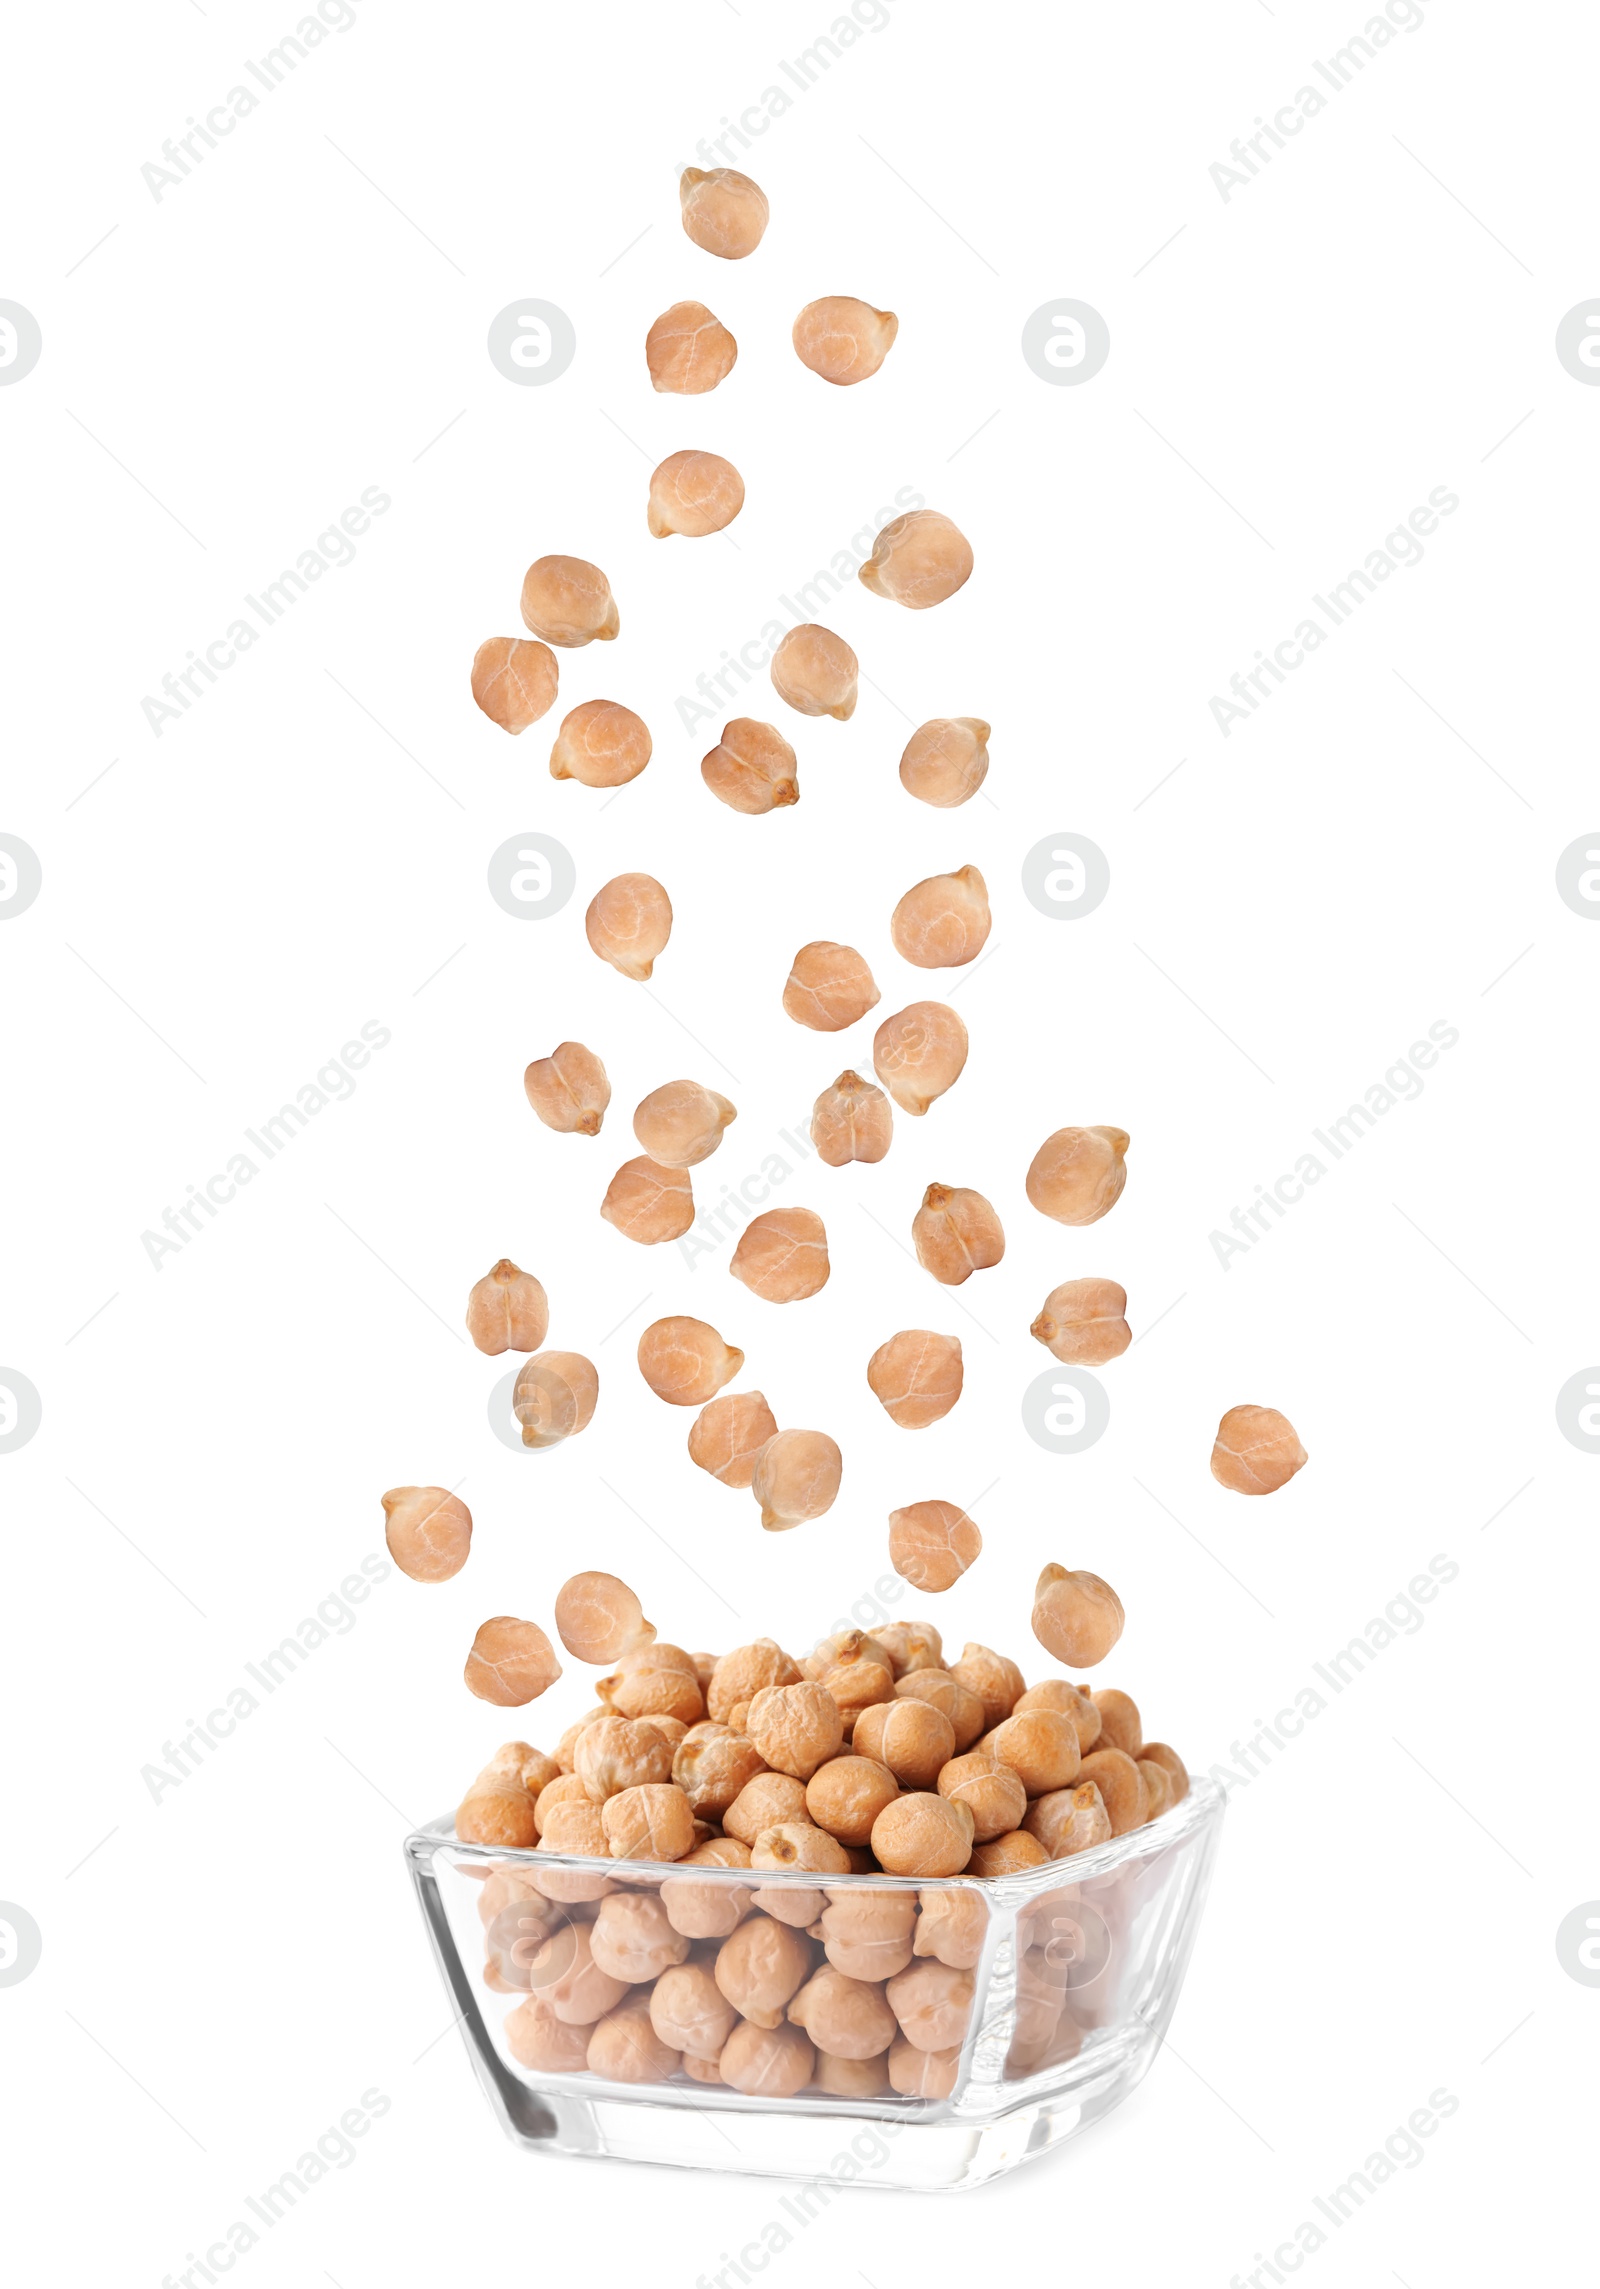 Image of Raw chickpeas falling into bowl on white background